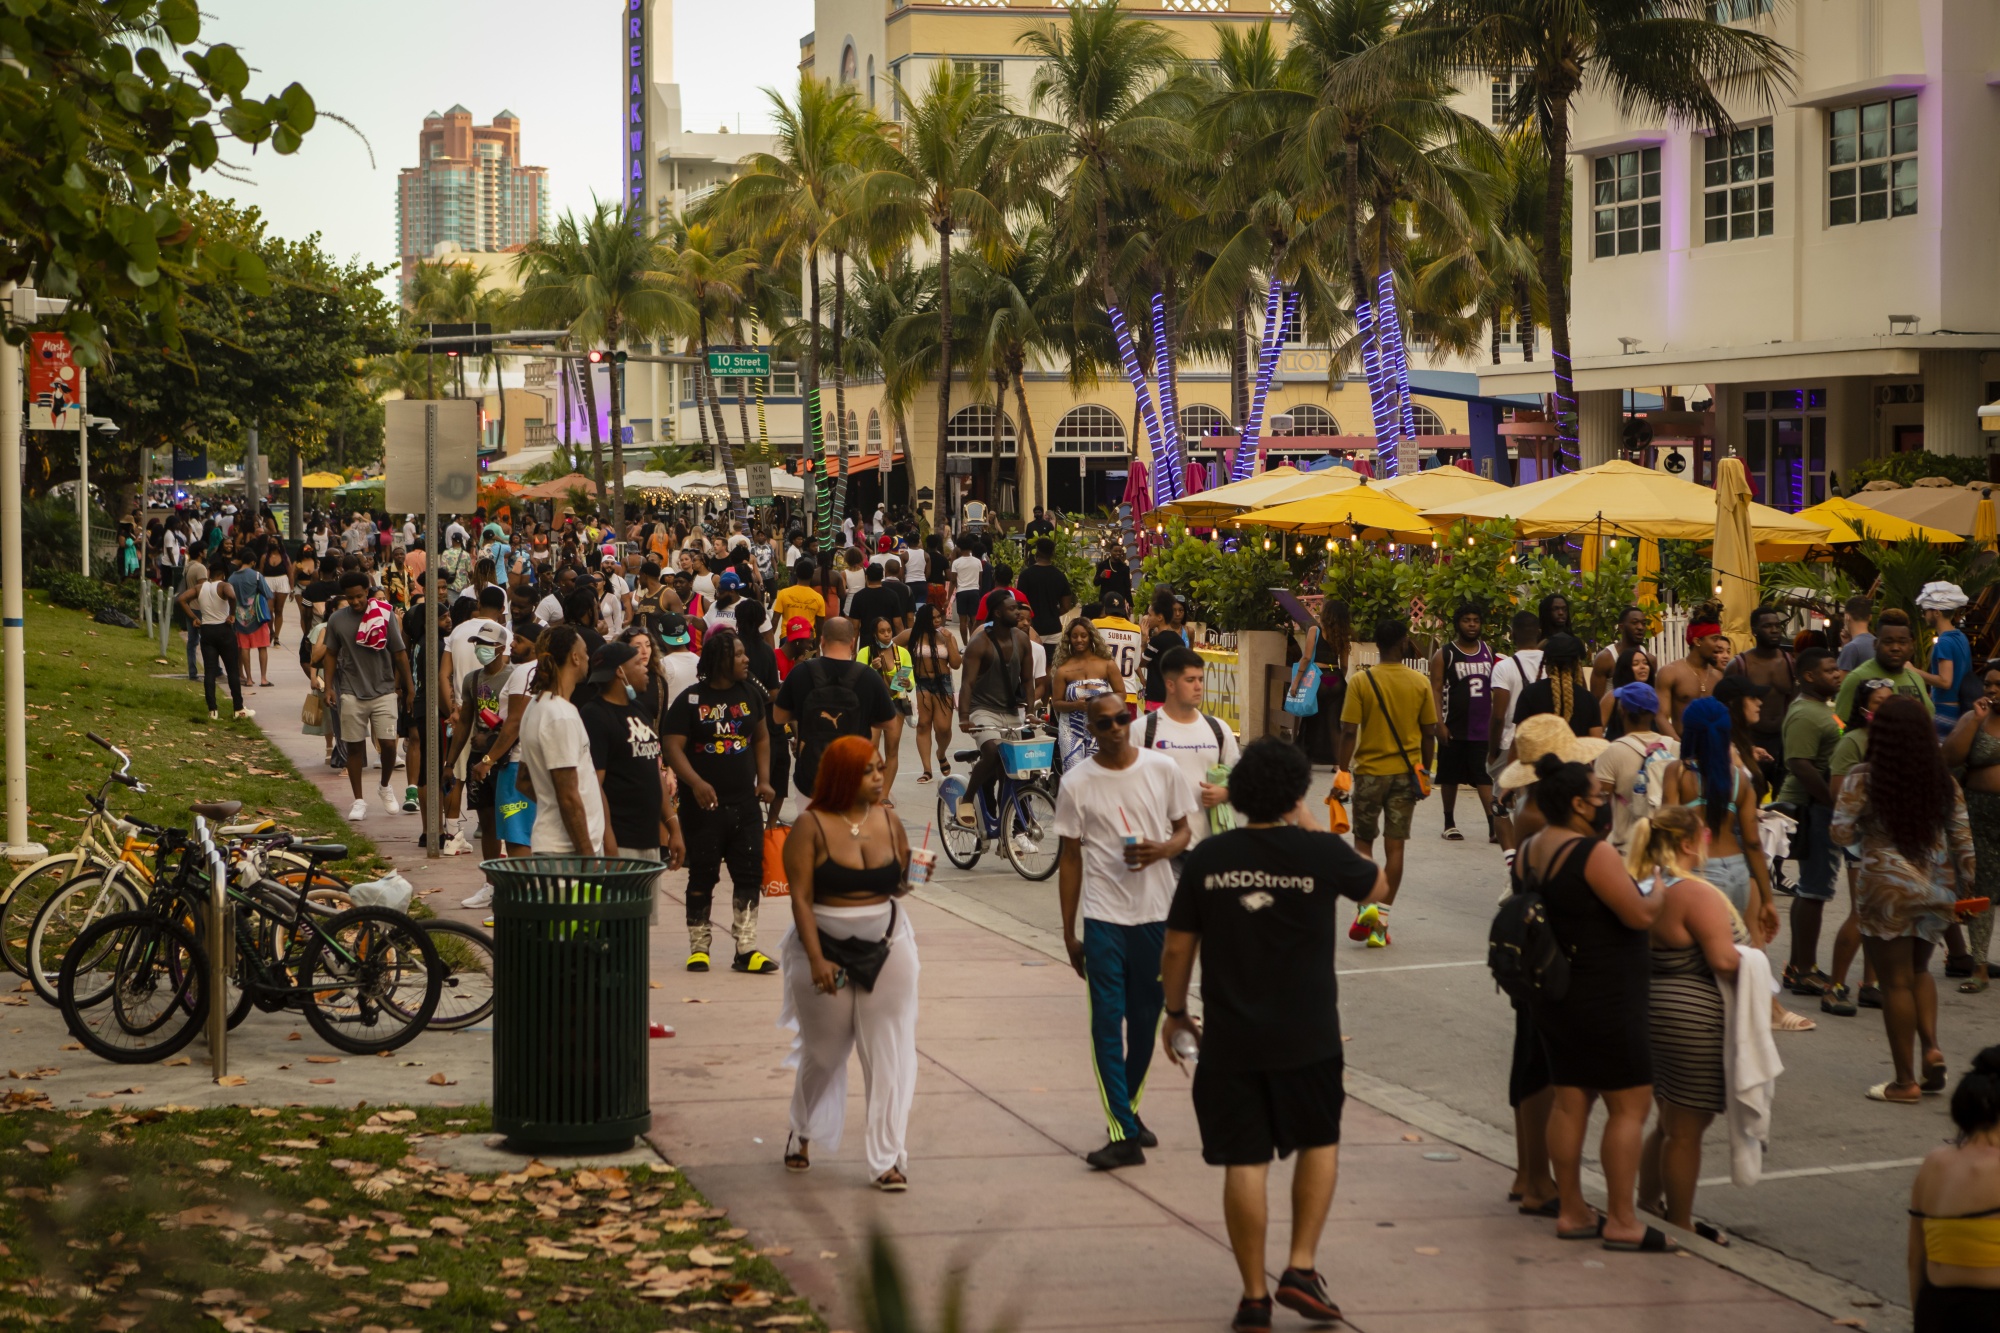 A crowd of people walk along Ocean Drive in the South Beach neighborhood of Miami, Florida.